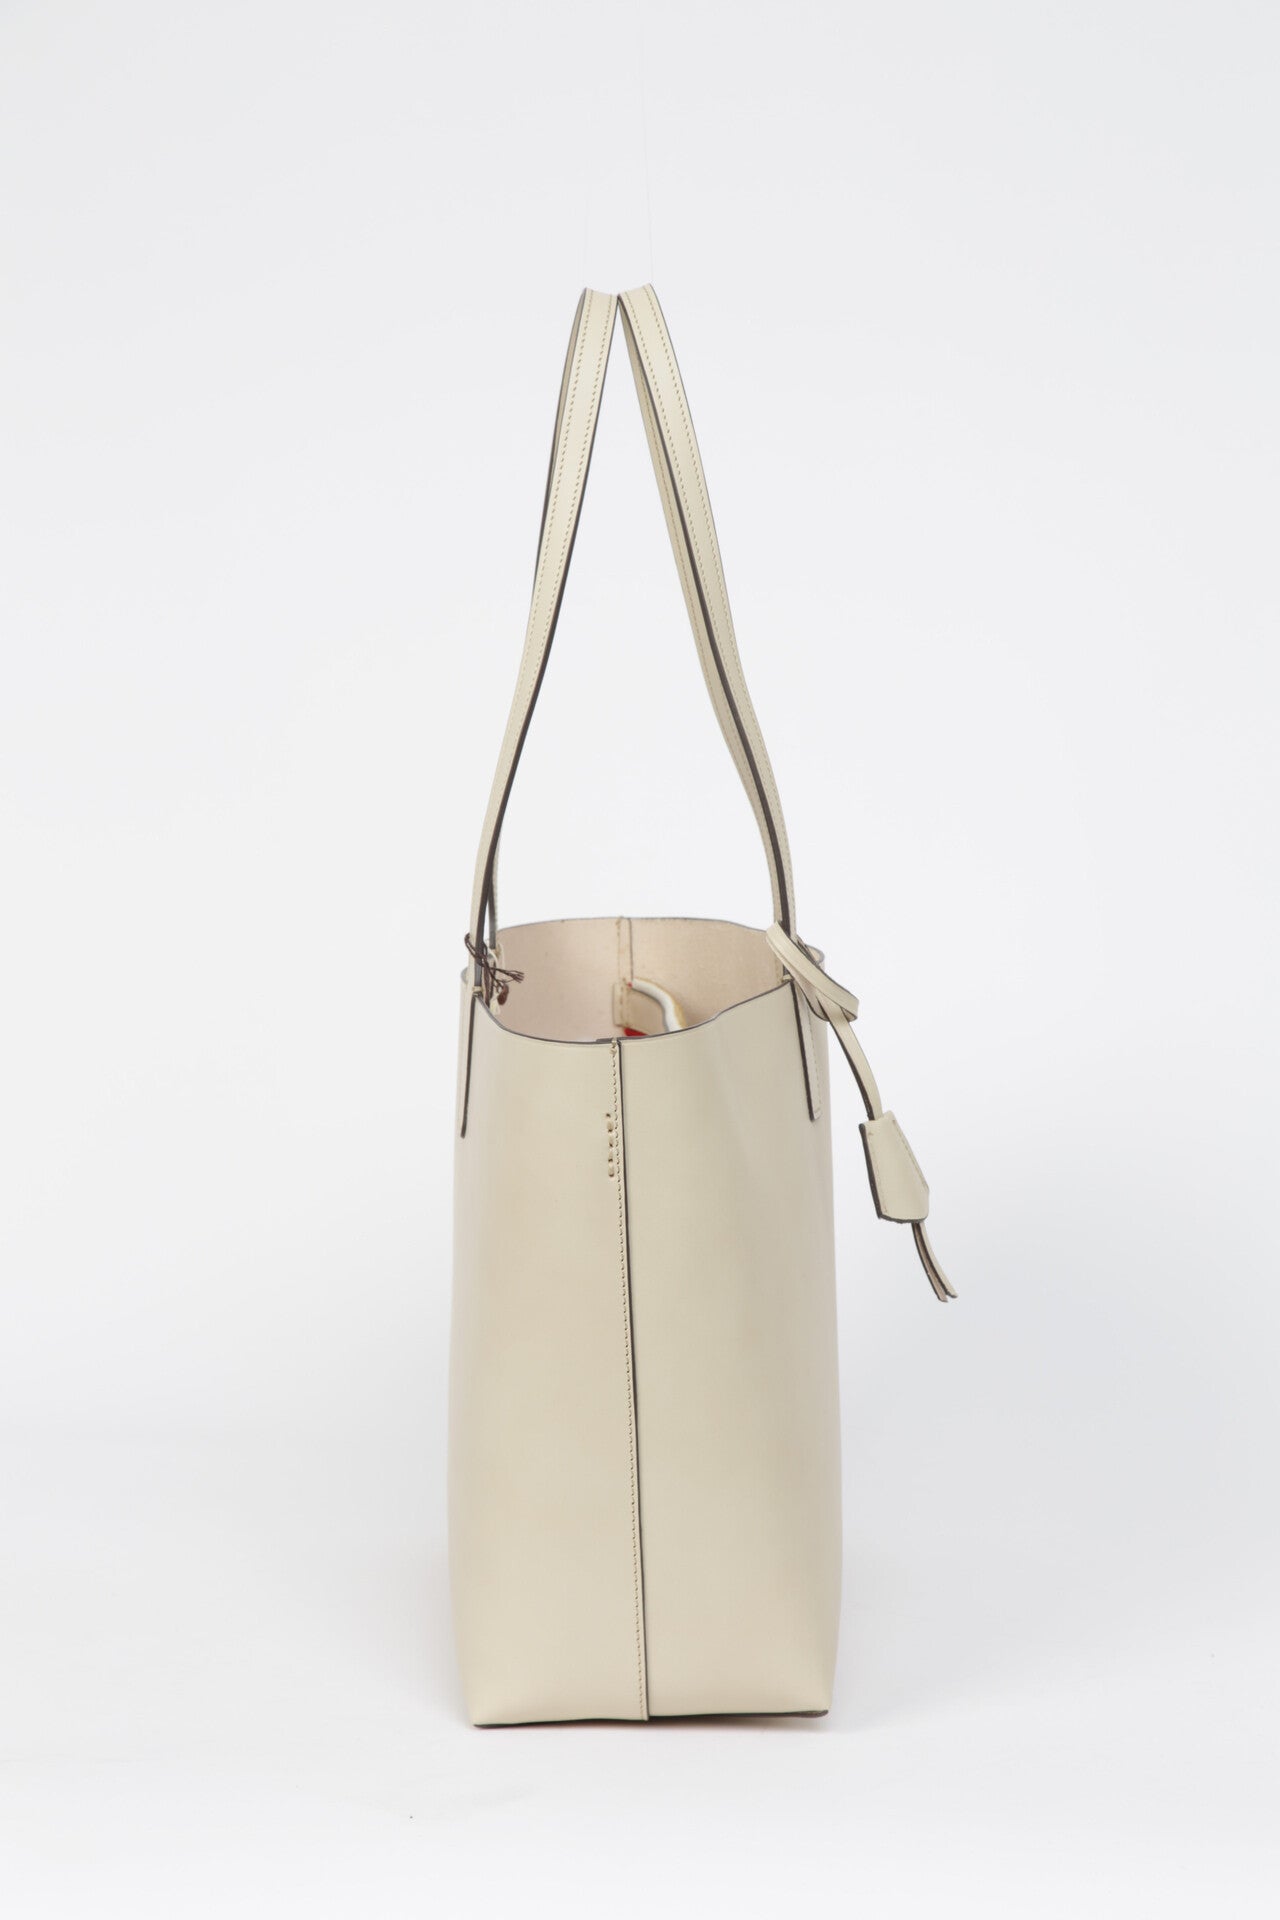 OSSO TOTE IN OFF-WHITE LEATHER